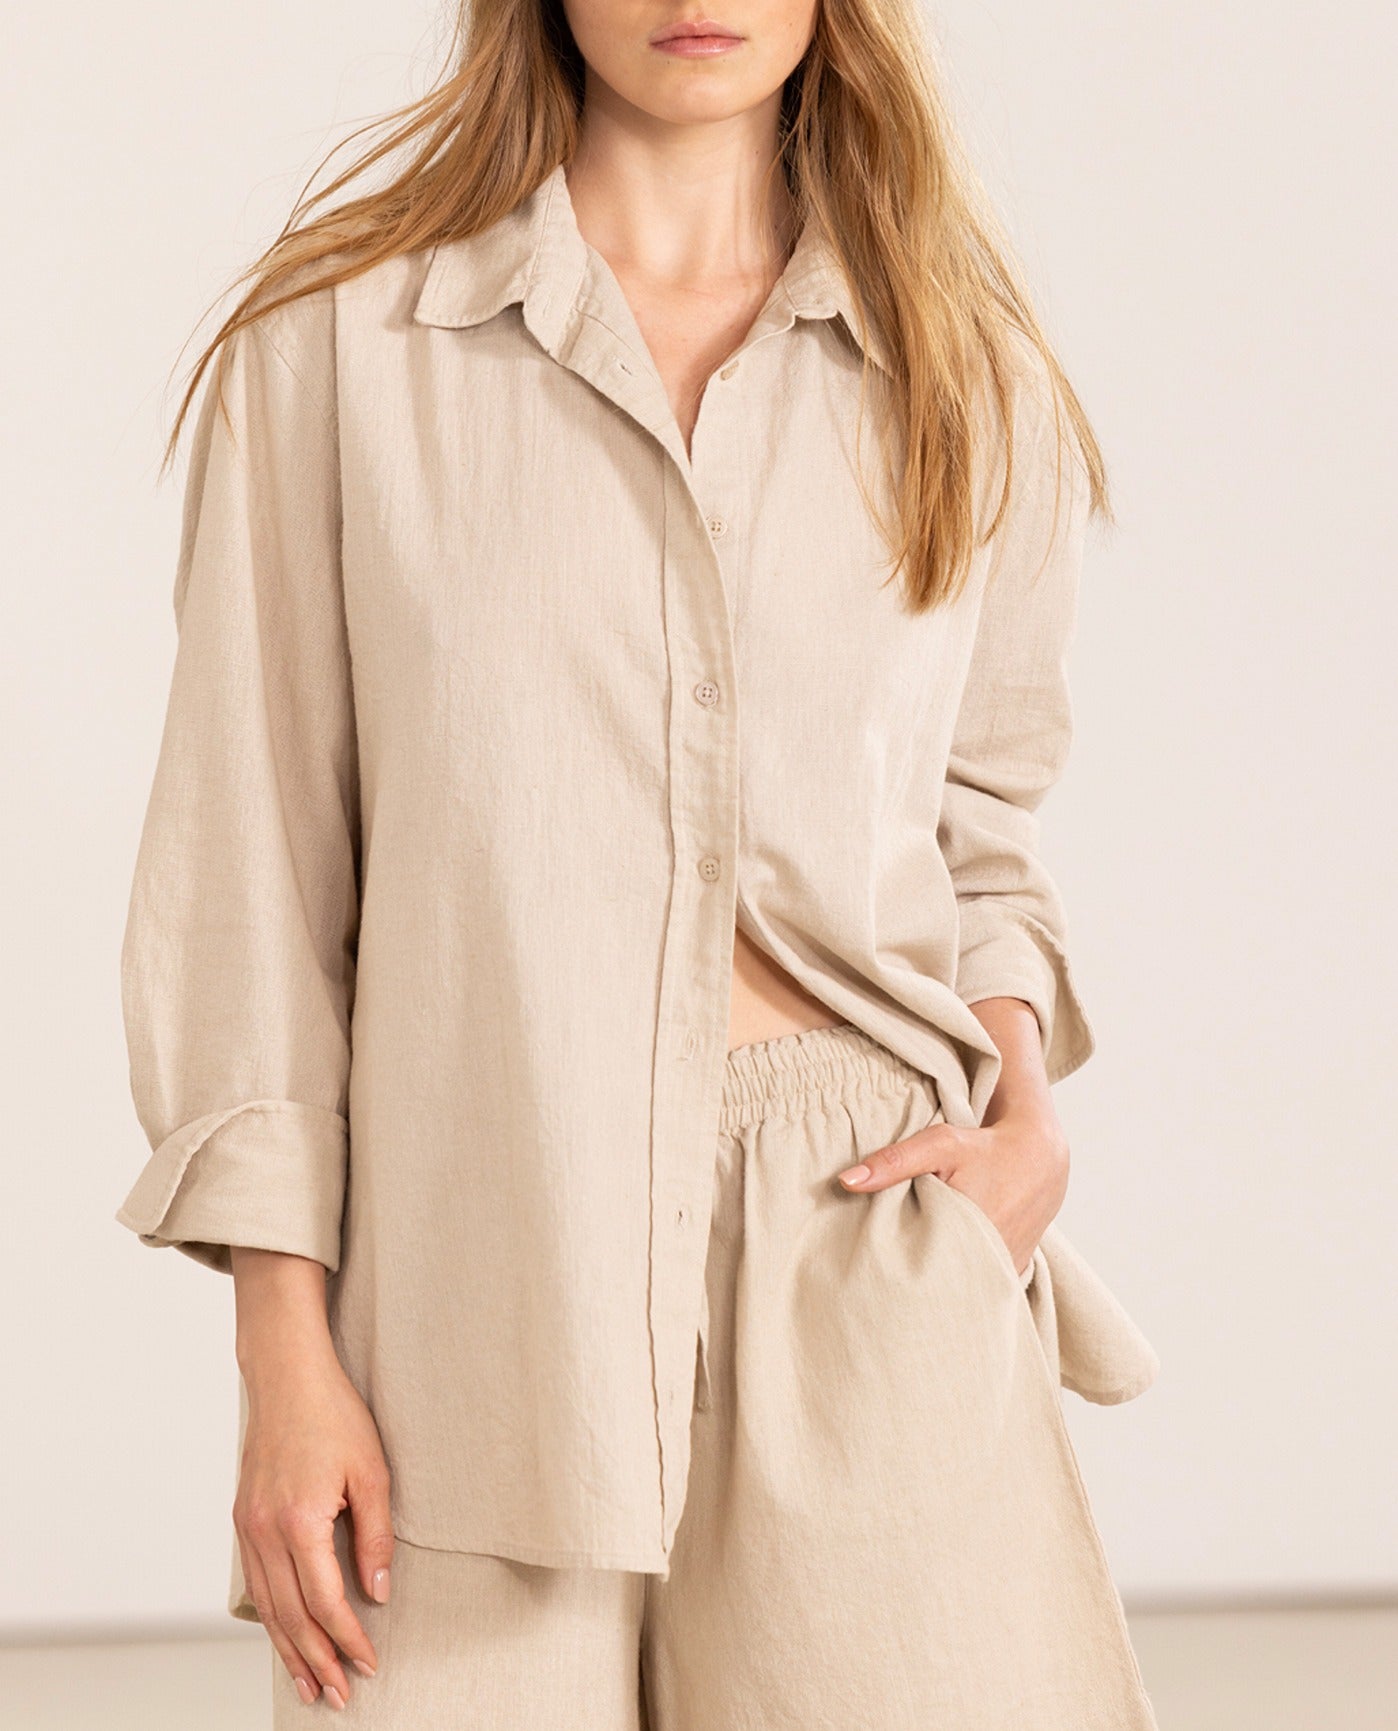 Front View Of Gottex Beach Life Long Sleeve Button Down Cover Up Blouse | GOTTEX BEACH LIFE NATURAL